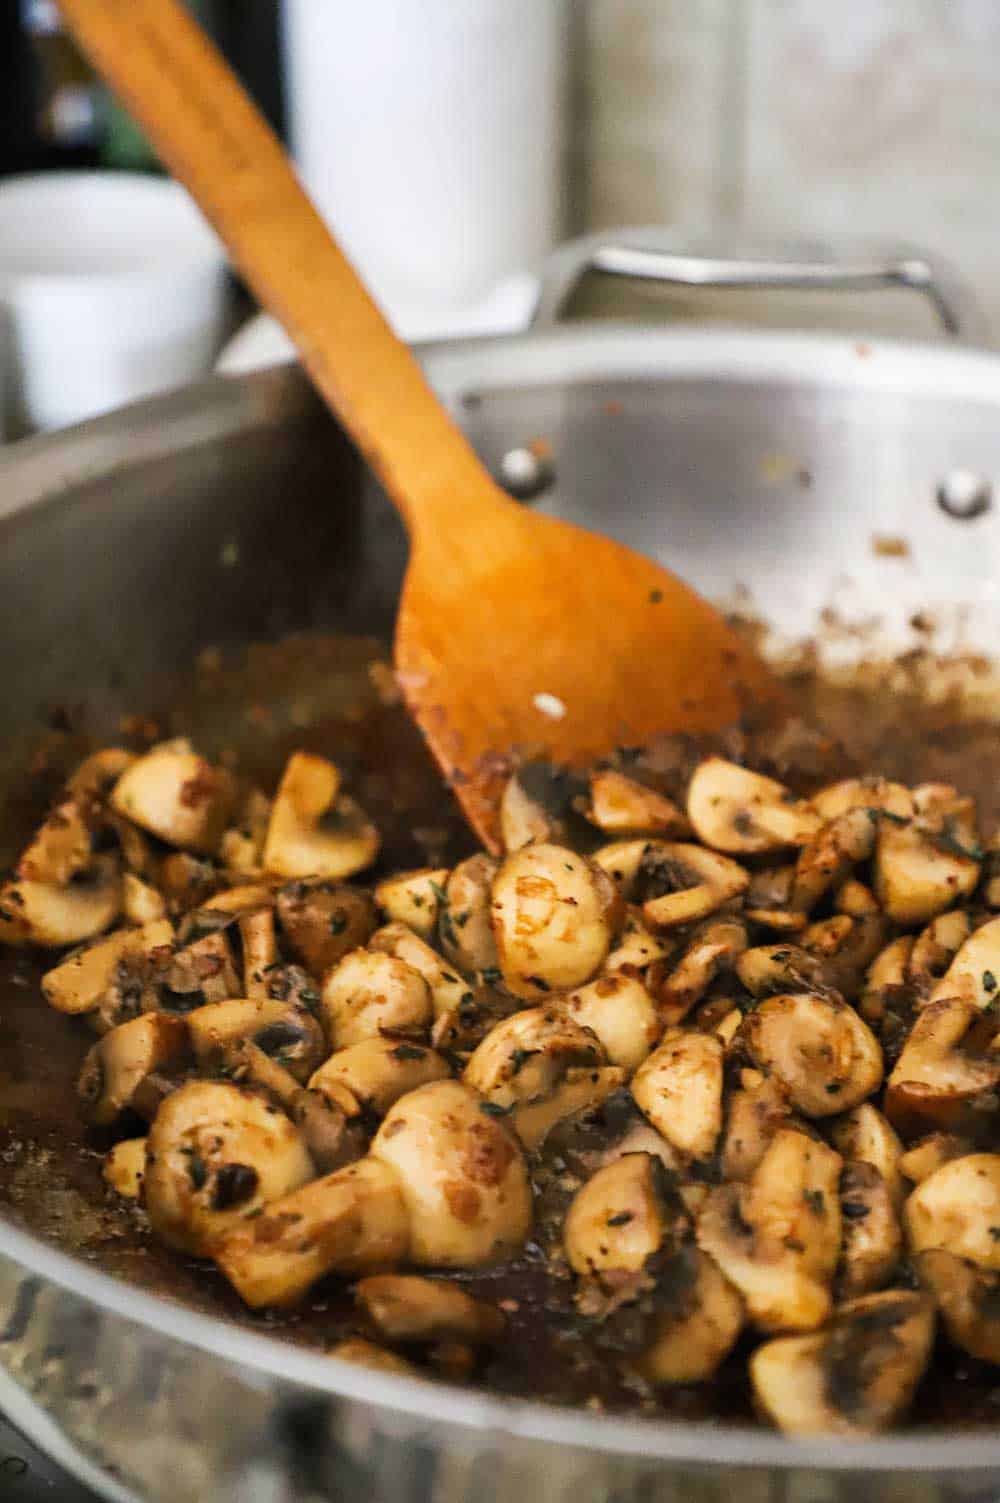 A stainless steel skillet filled with quartered wild mushrooms that have been sautéd and stirred with a wooden spoon.